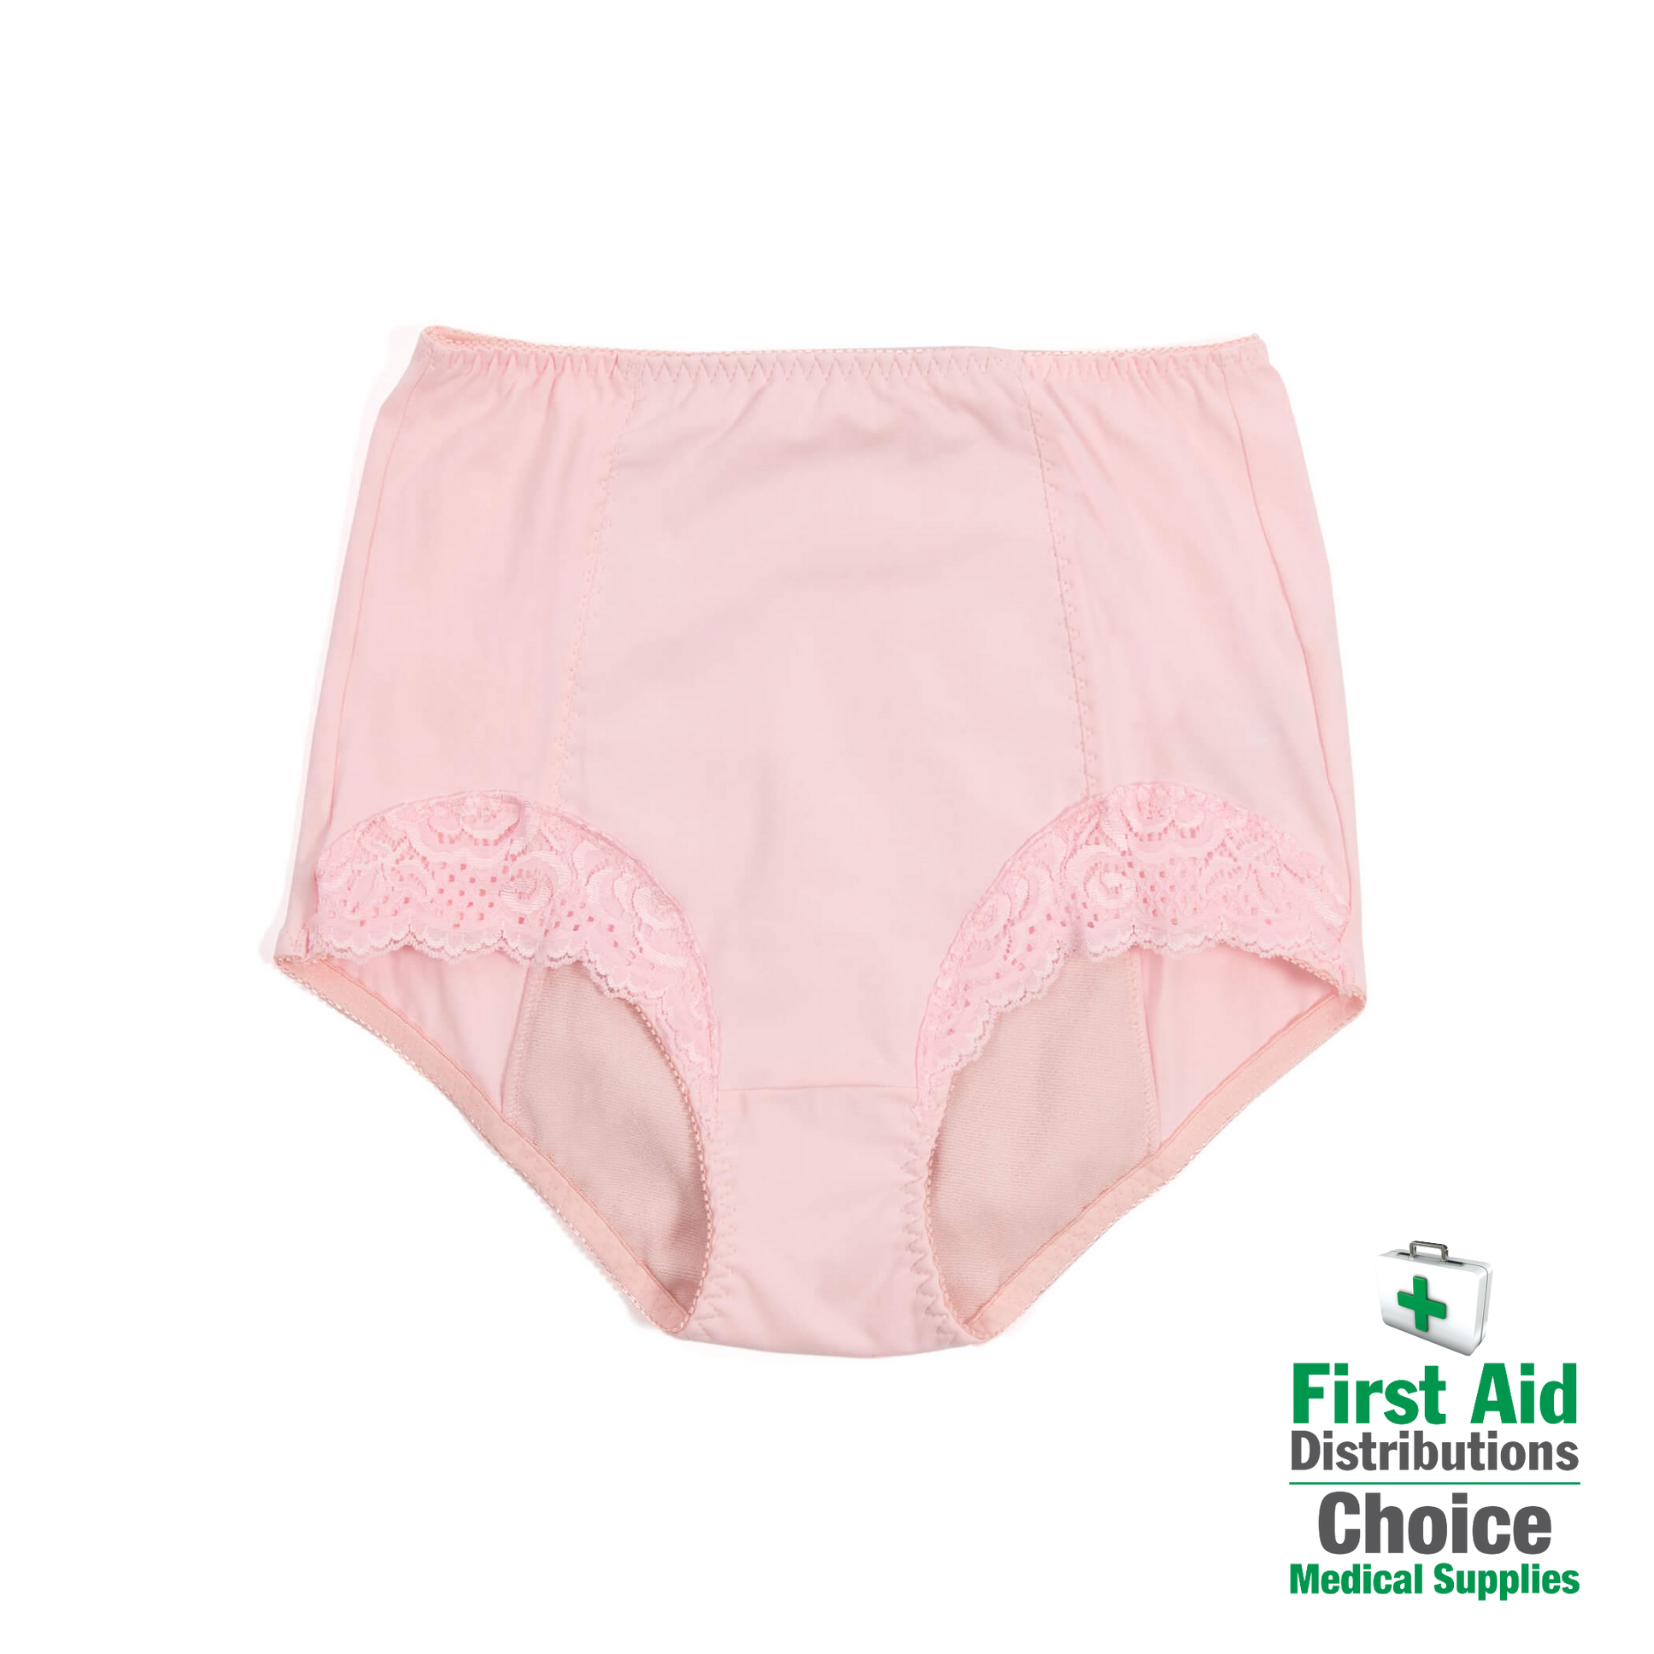 collections/Conni_Chantilly_Pink_First_Aid_Distributions.png